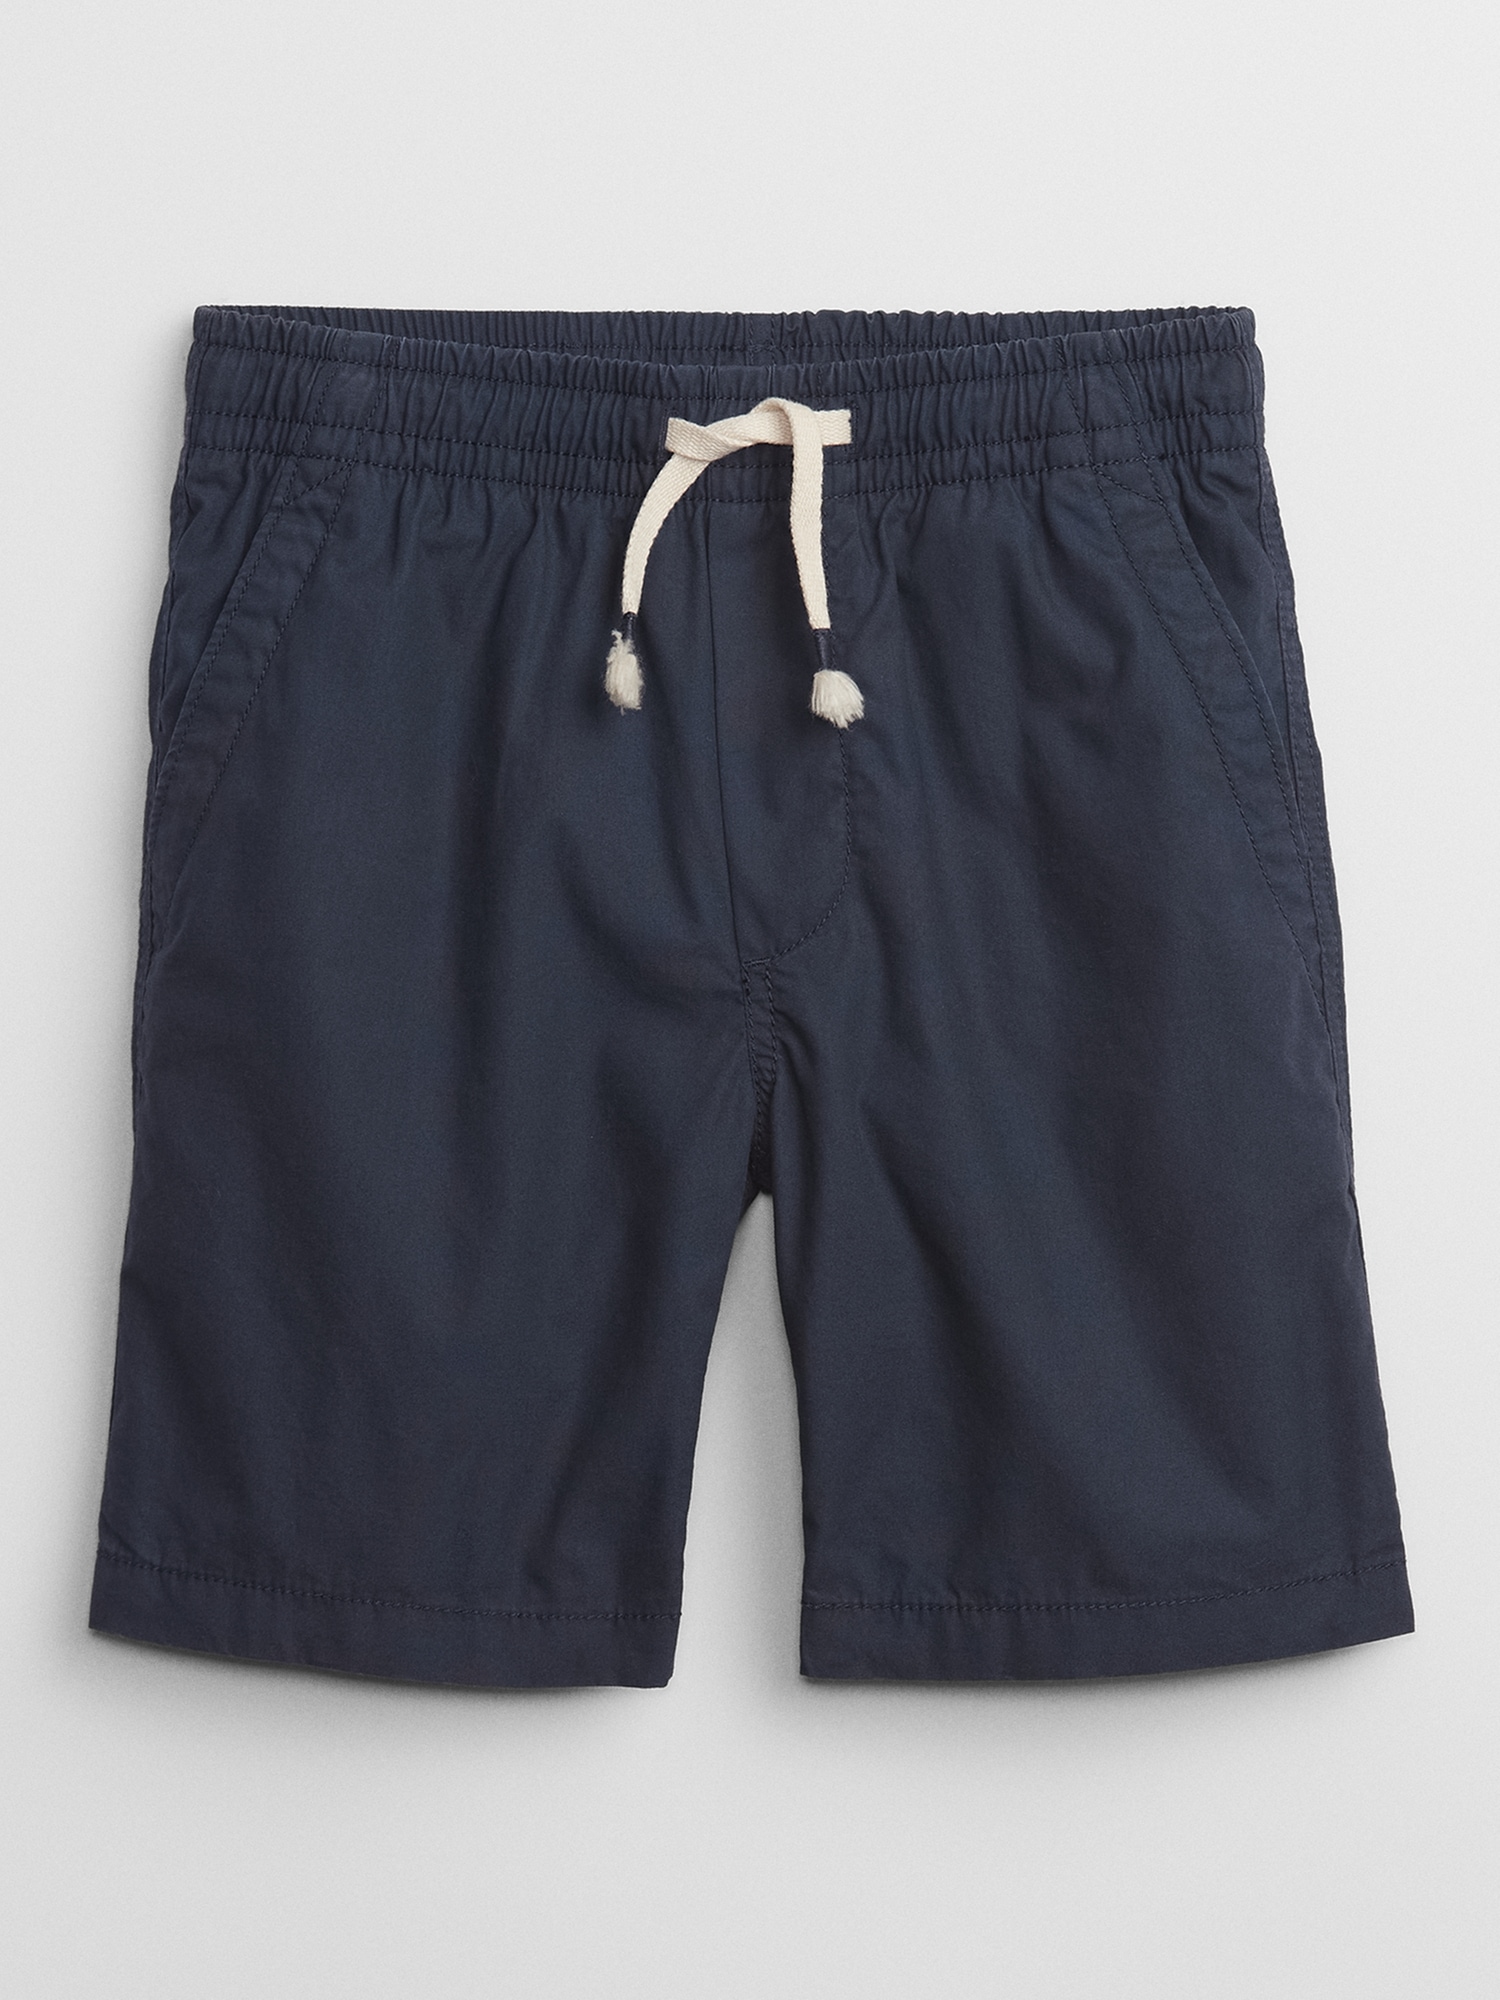 Kids Pull-On Shorts